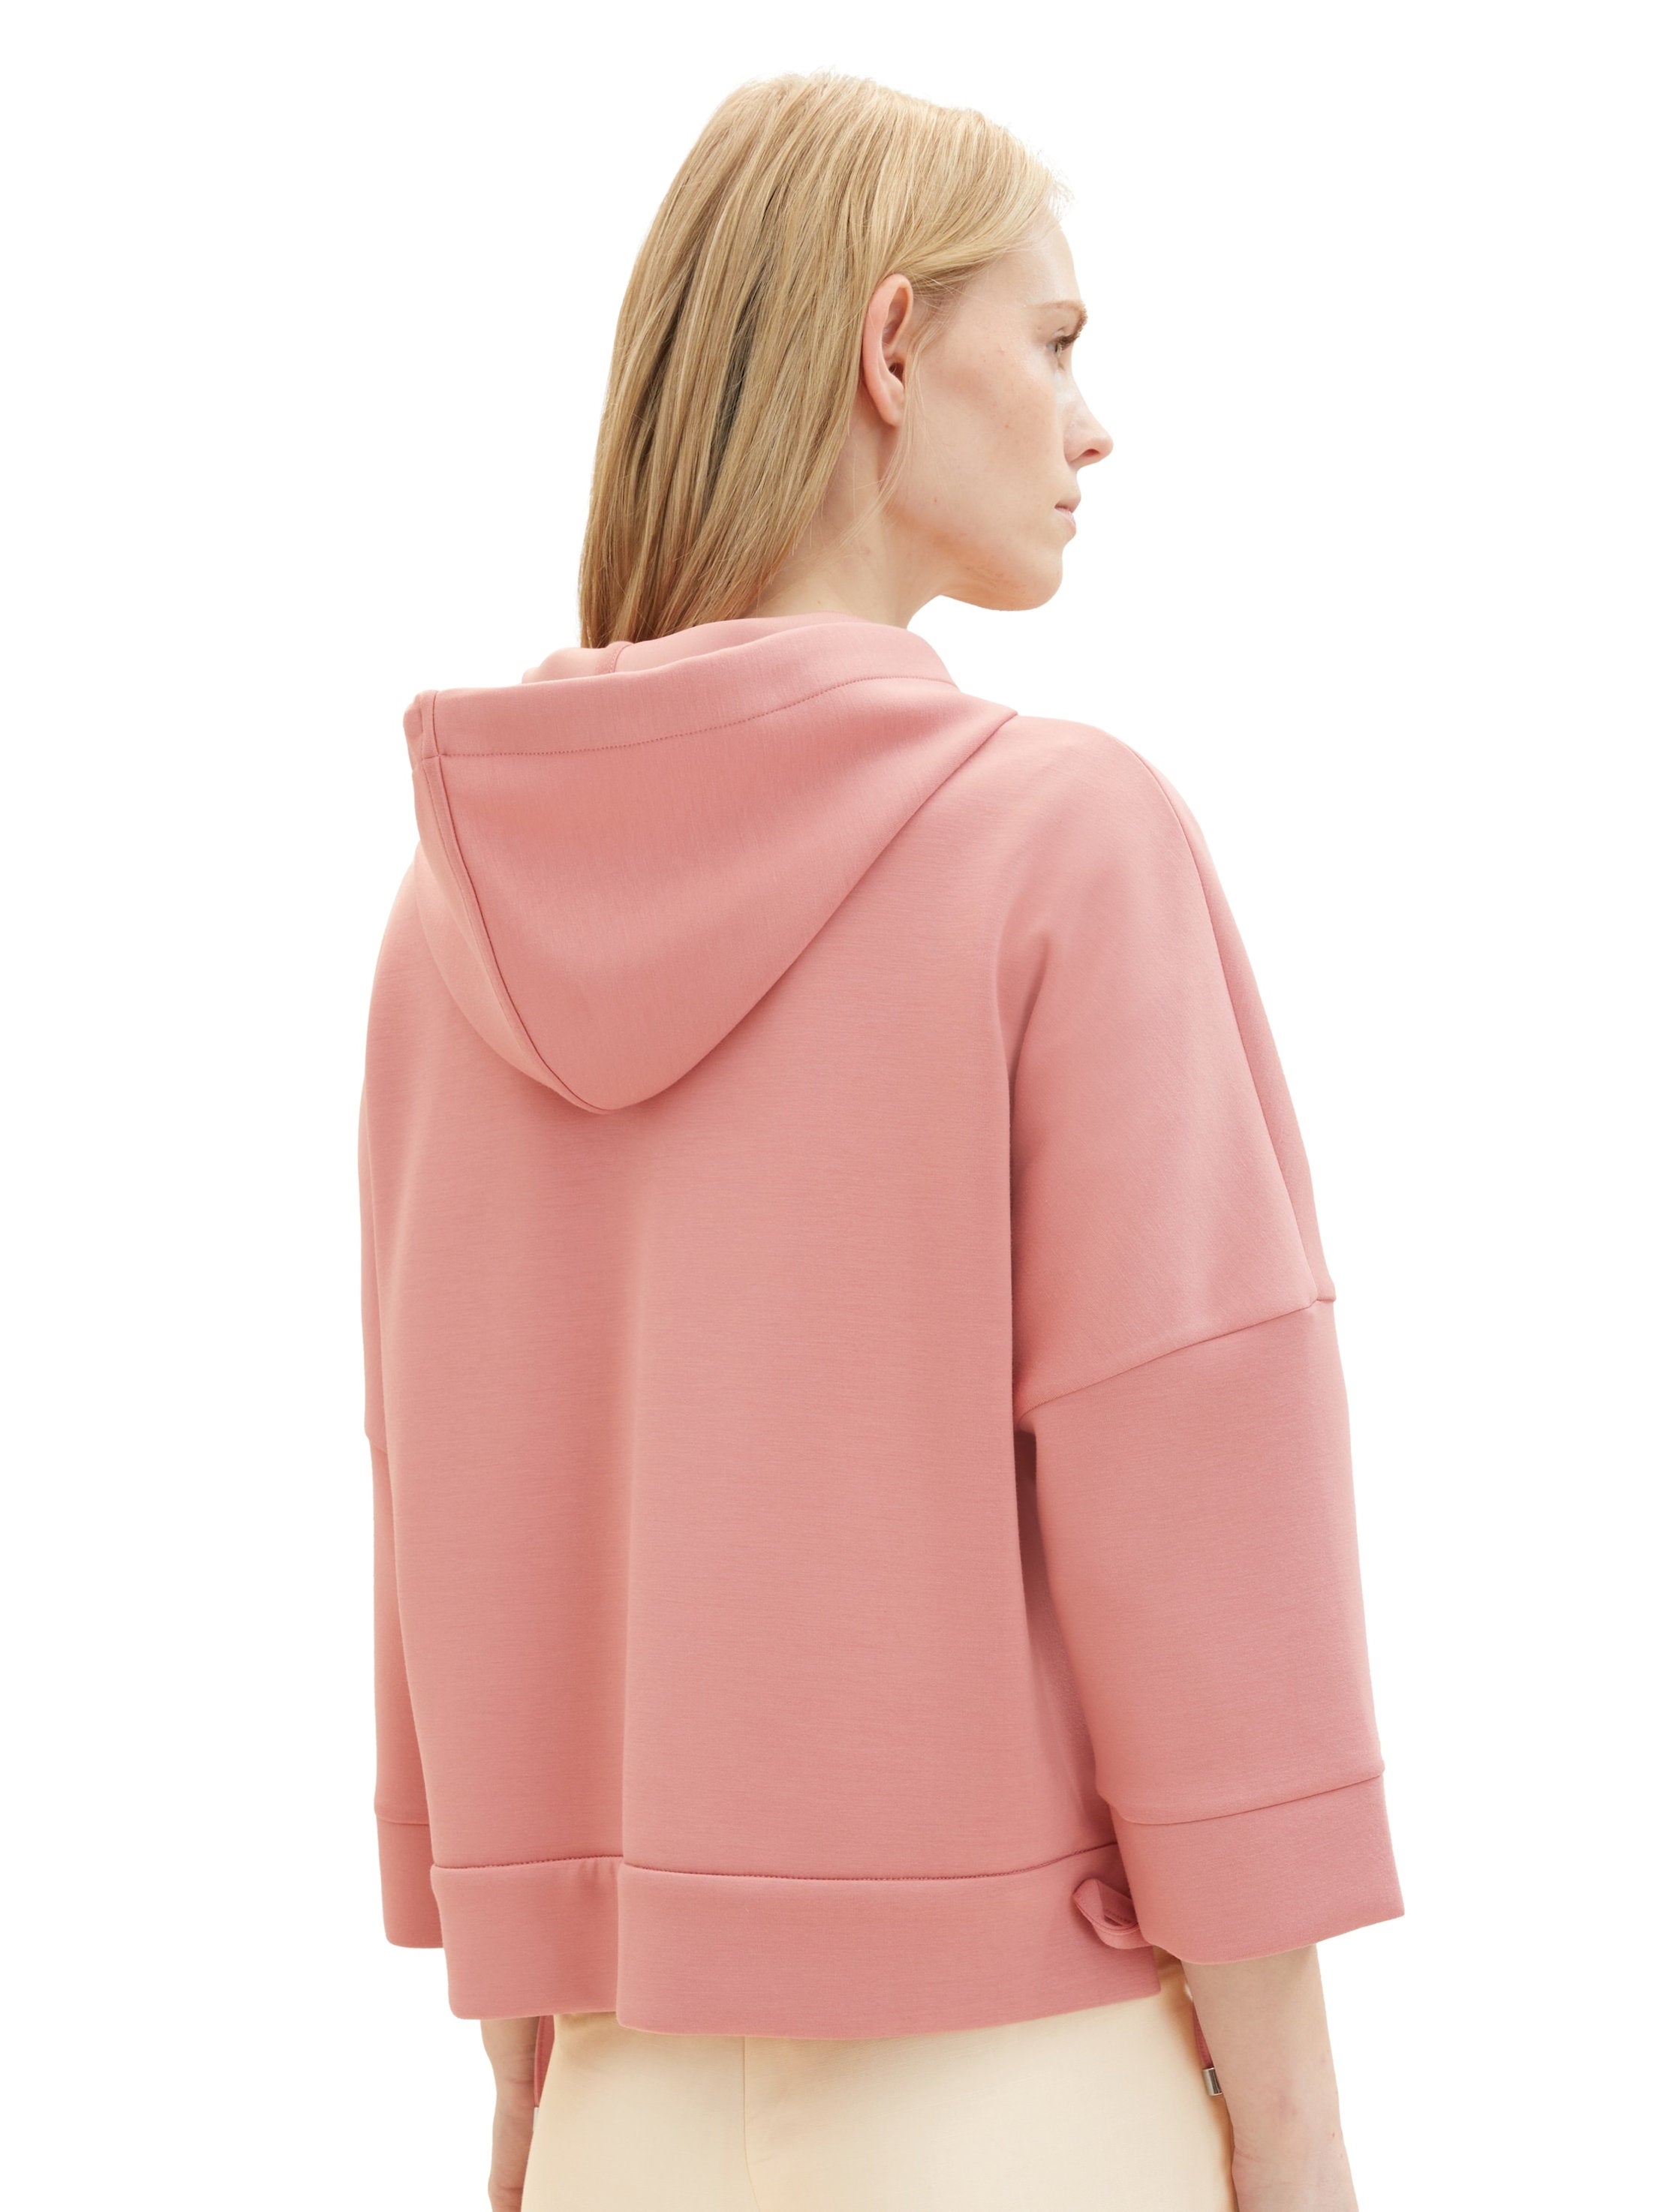 Hoodie With Adjustable Side Strap_1038182_32224_04